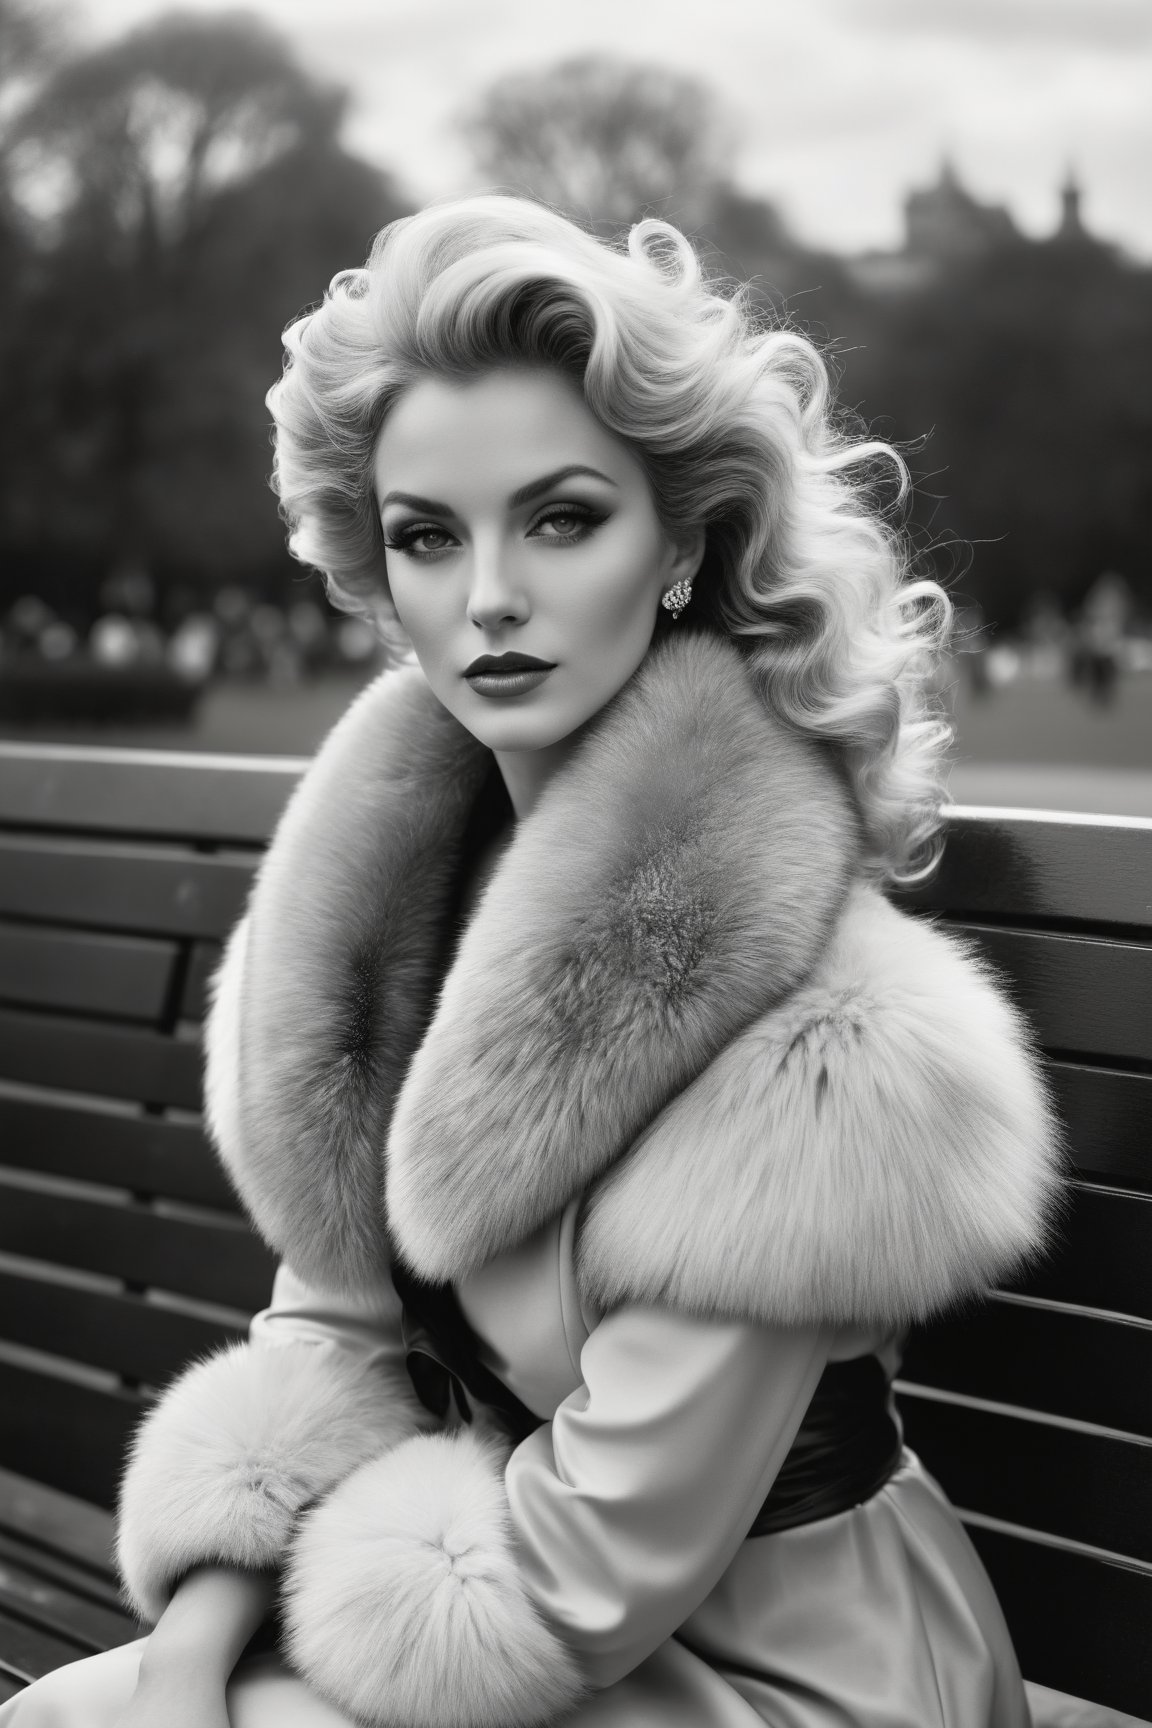 A captivating black and white portrait of a woman seated on a bench in Hyde Park, London during the 1970s. She is dressed in a form-fitting dress, a fur stole, and heels, with platinum blonde curls framing her enigmatic face. The artists have combined their signature styles to create a masterpiece that captures the essence of the era and the subject's mesmerizing allure. The ominous clouds in the sky hint at a windy day, while dark fantasy elements give the scene an air of mystery. The harmonious blend of Hollywood glamour, urban atmosphere, and mystique creates an unforgettable work of art.